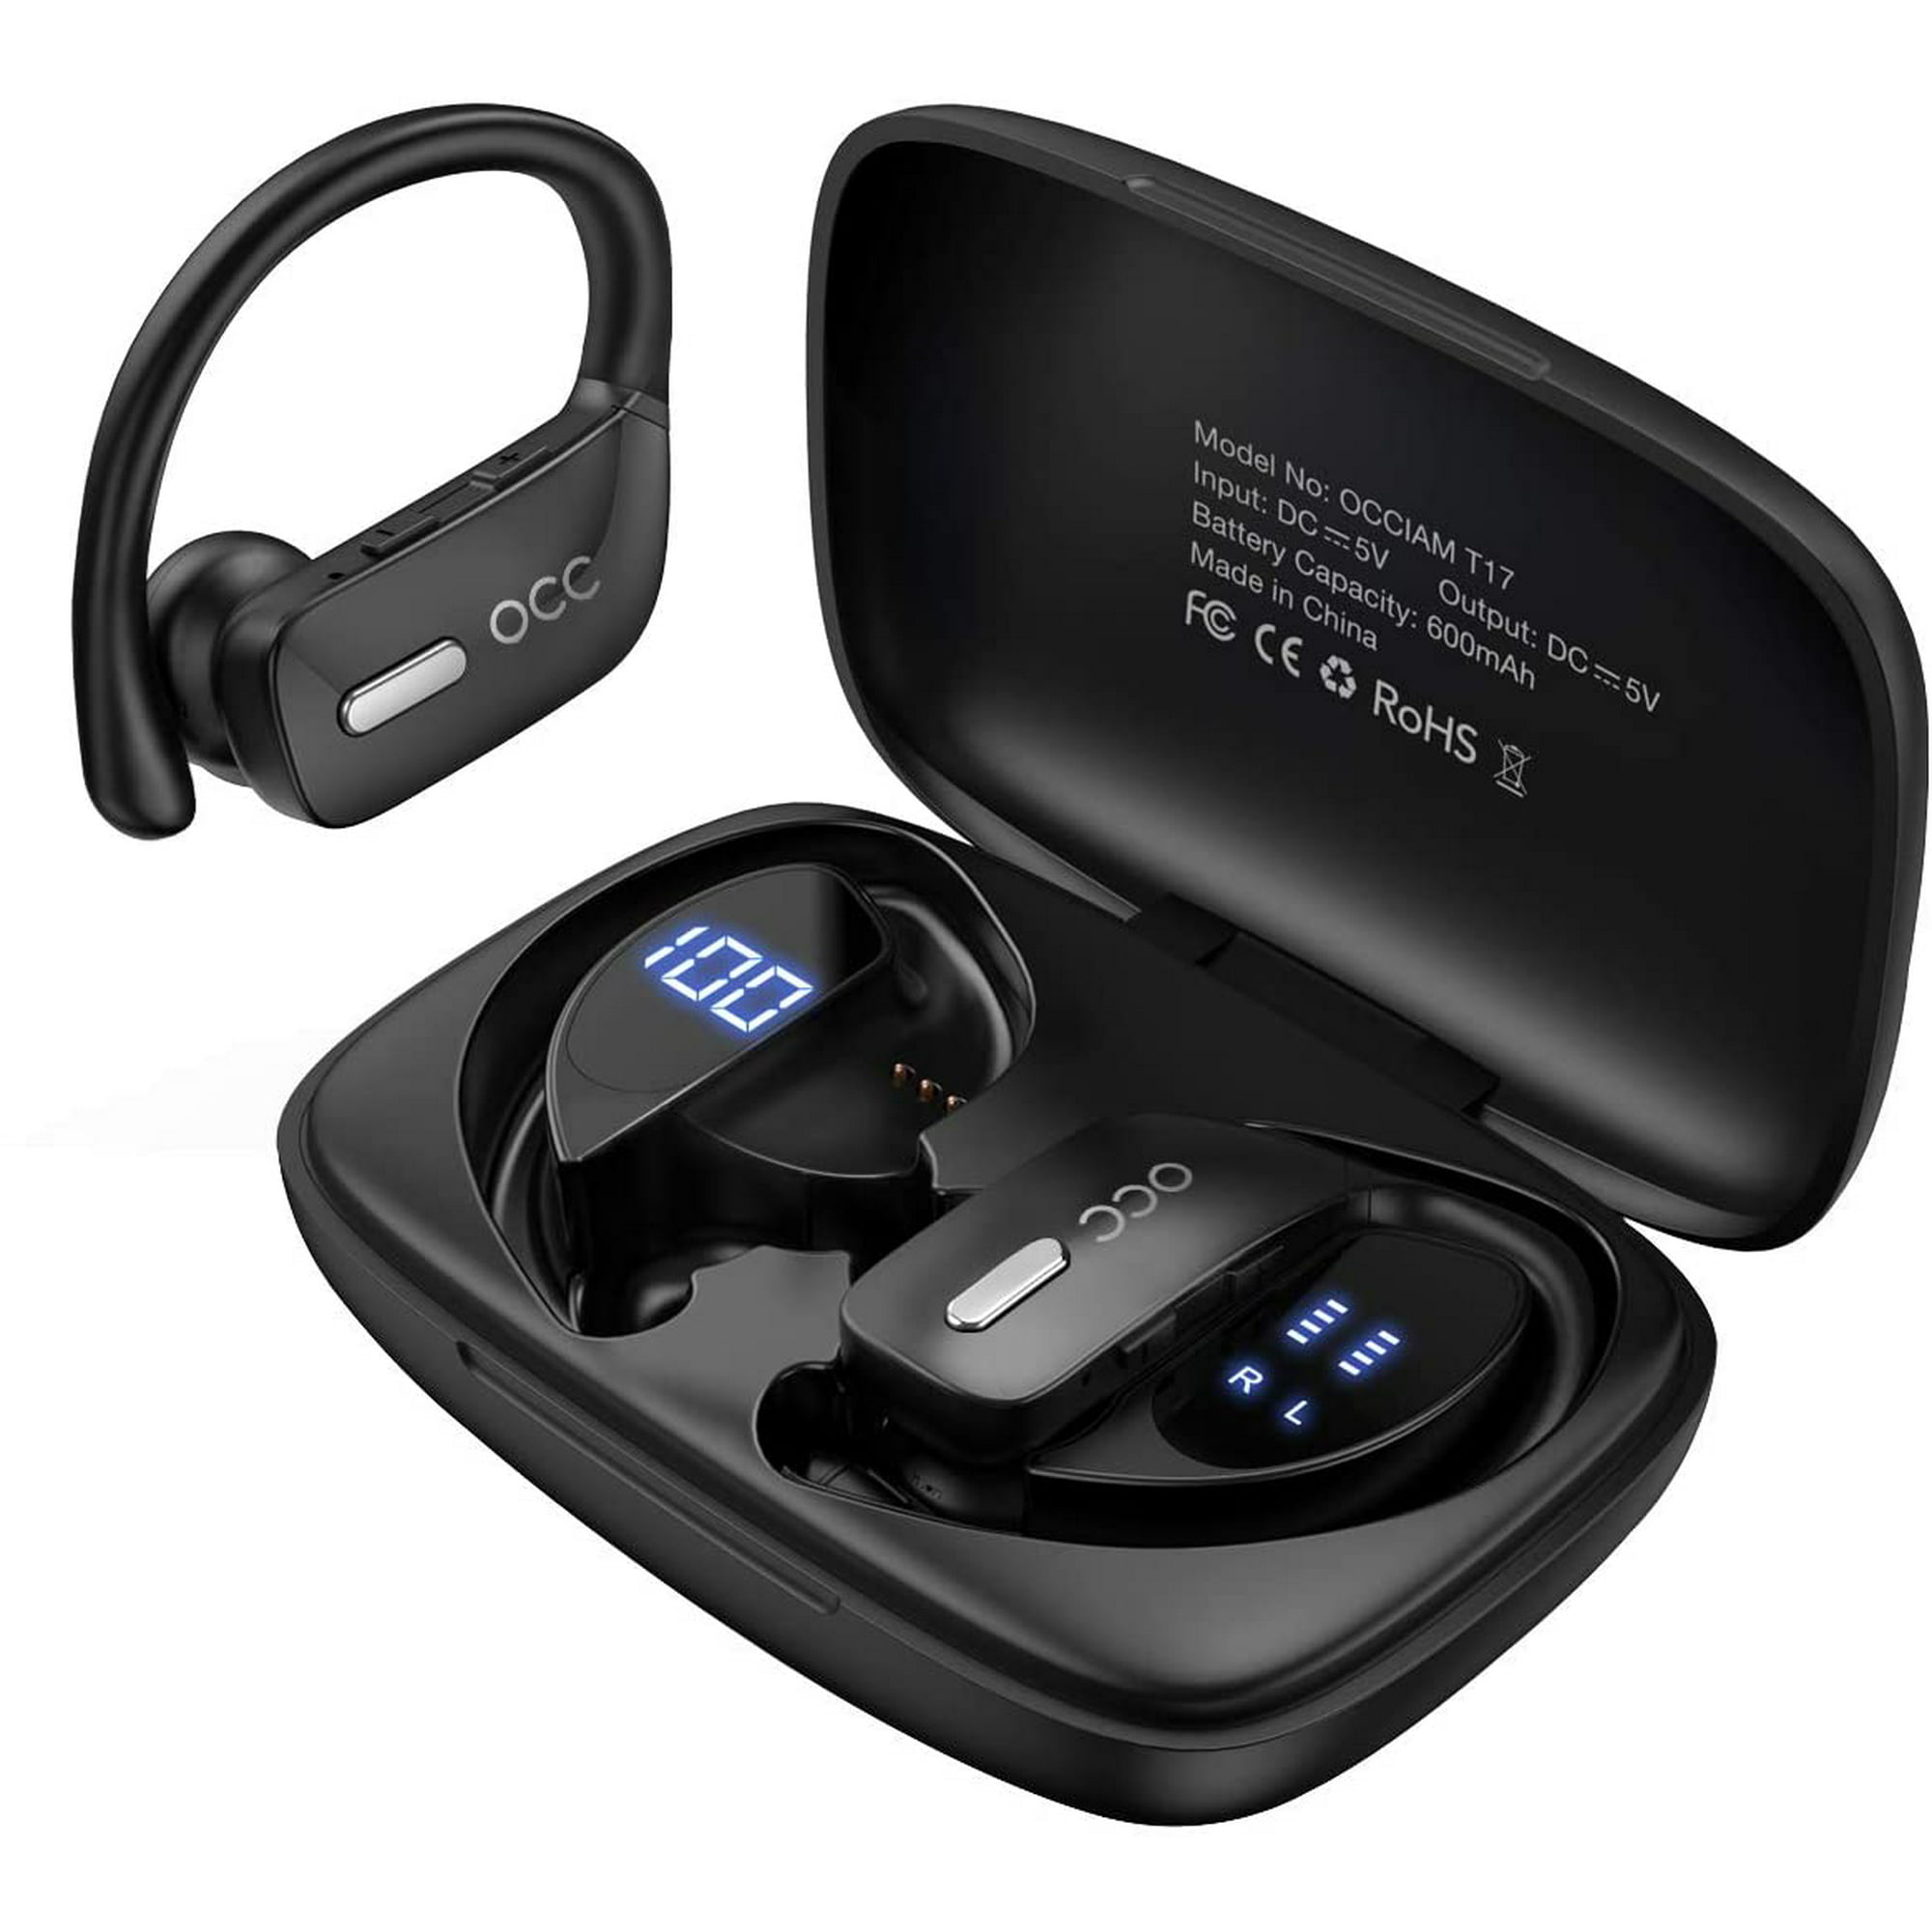 Occiam Bluetooth Headphones-True Wireless Earbuds 48Hrs Playtime Earphones TWS Bass Loud Voice Call Over Ear Waterproof with Microphone Smart LED Display for Sports Gaming Workout-Black -